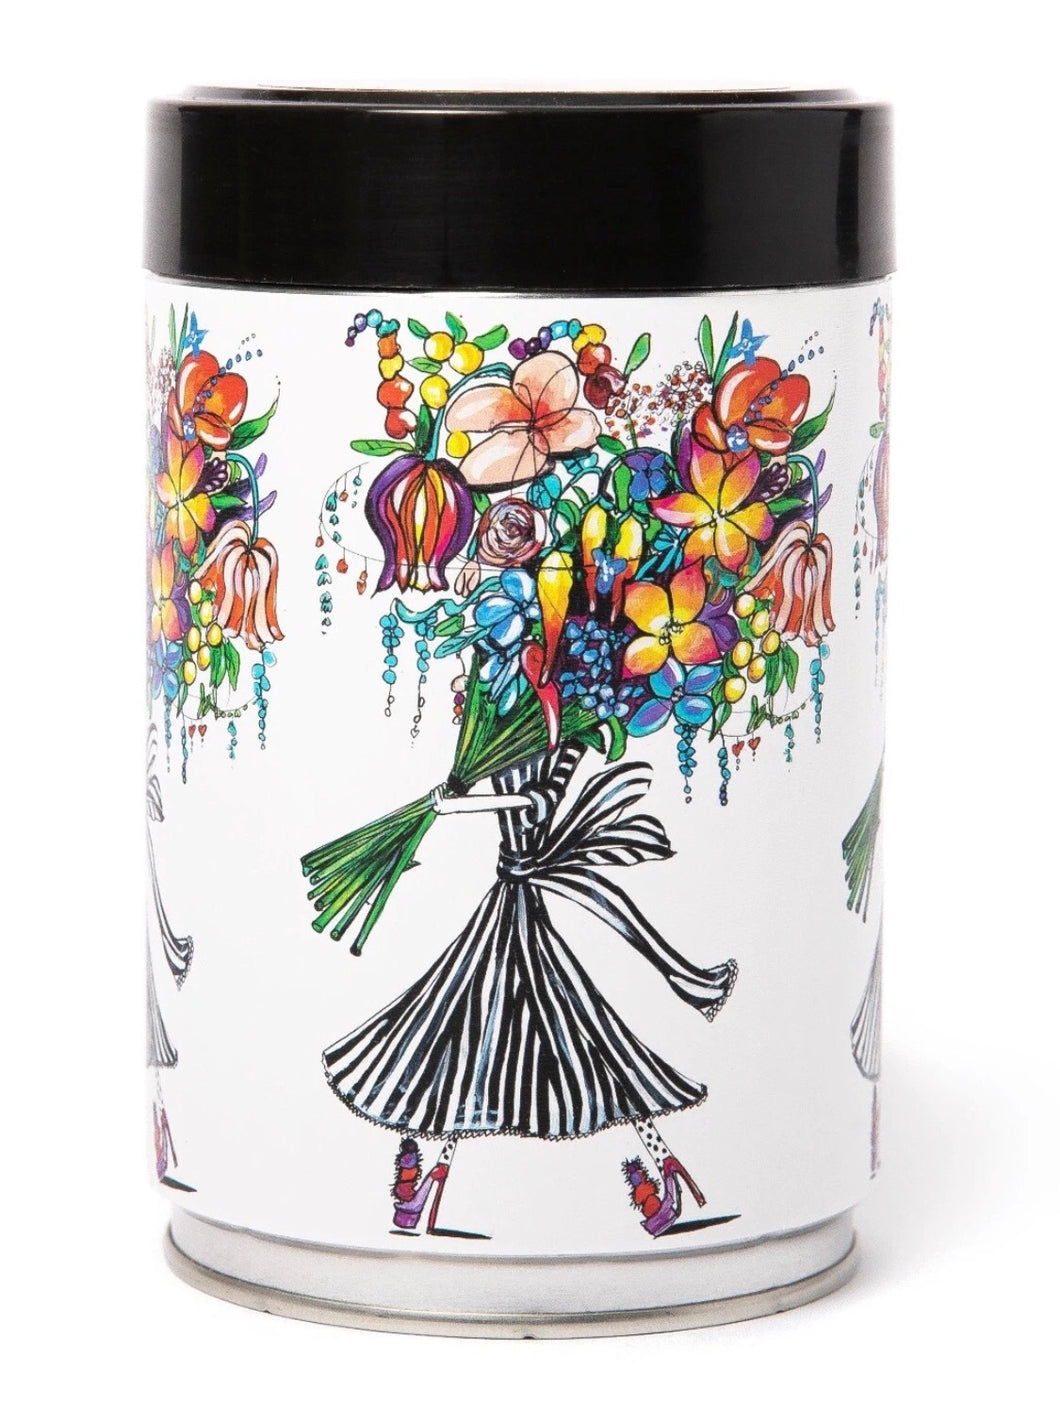 LIMITED EDITION COFFEE TIN - FLOWER POWER  £15.00